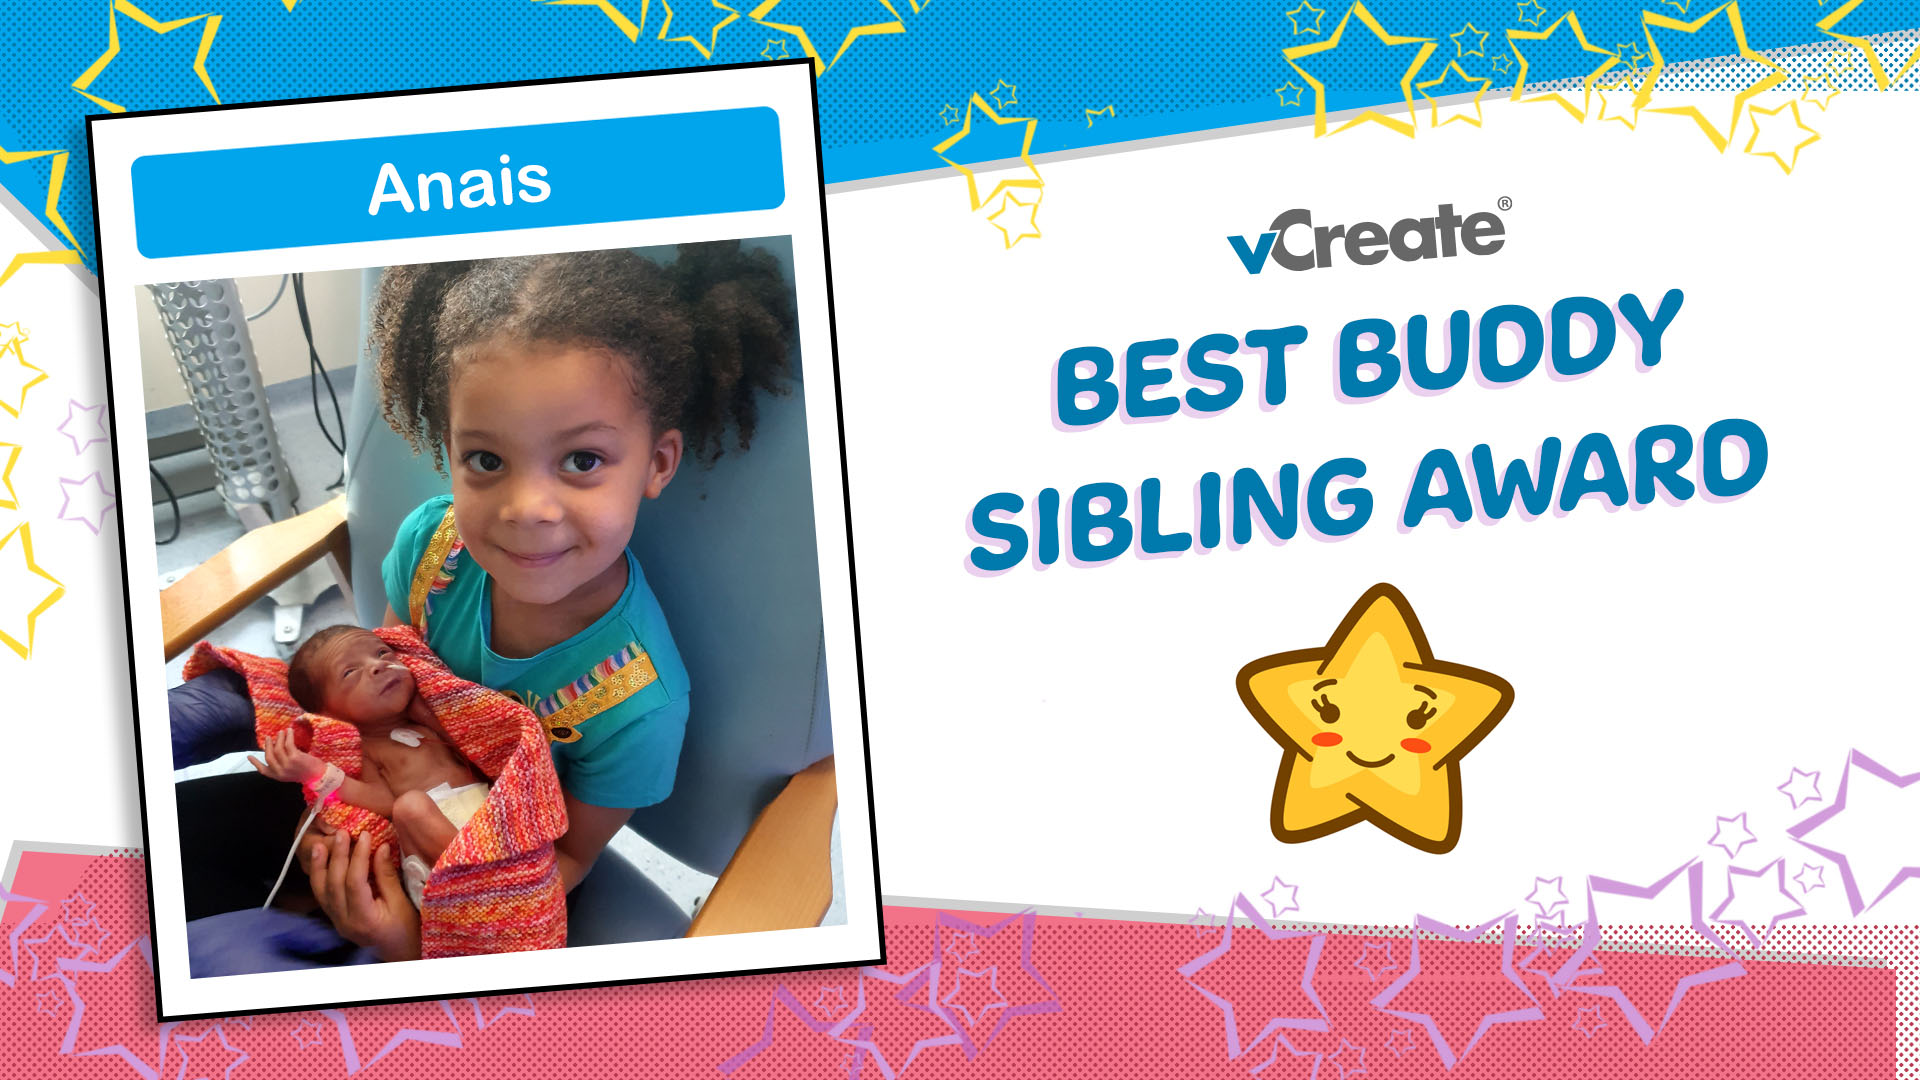 Big sister, Anais, is receiving our Best Buddy Sibling Award this week!